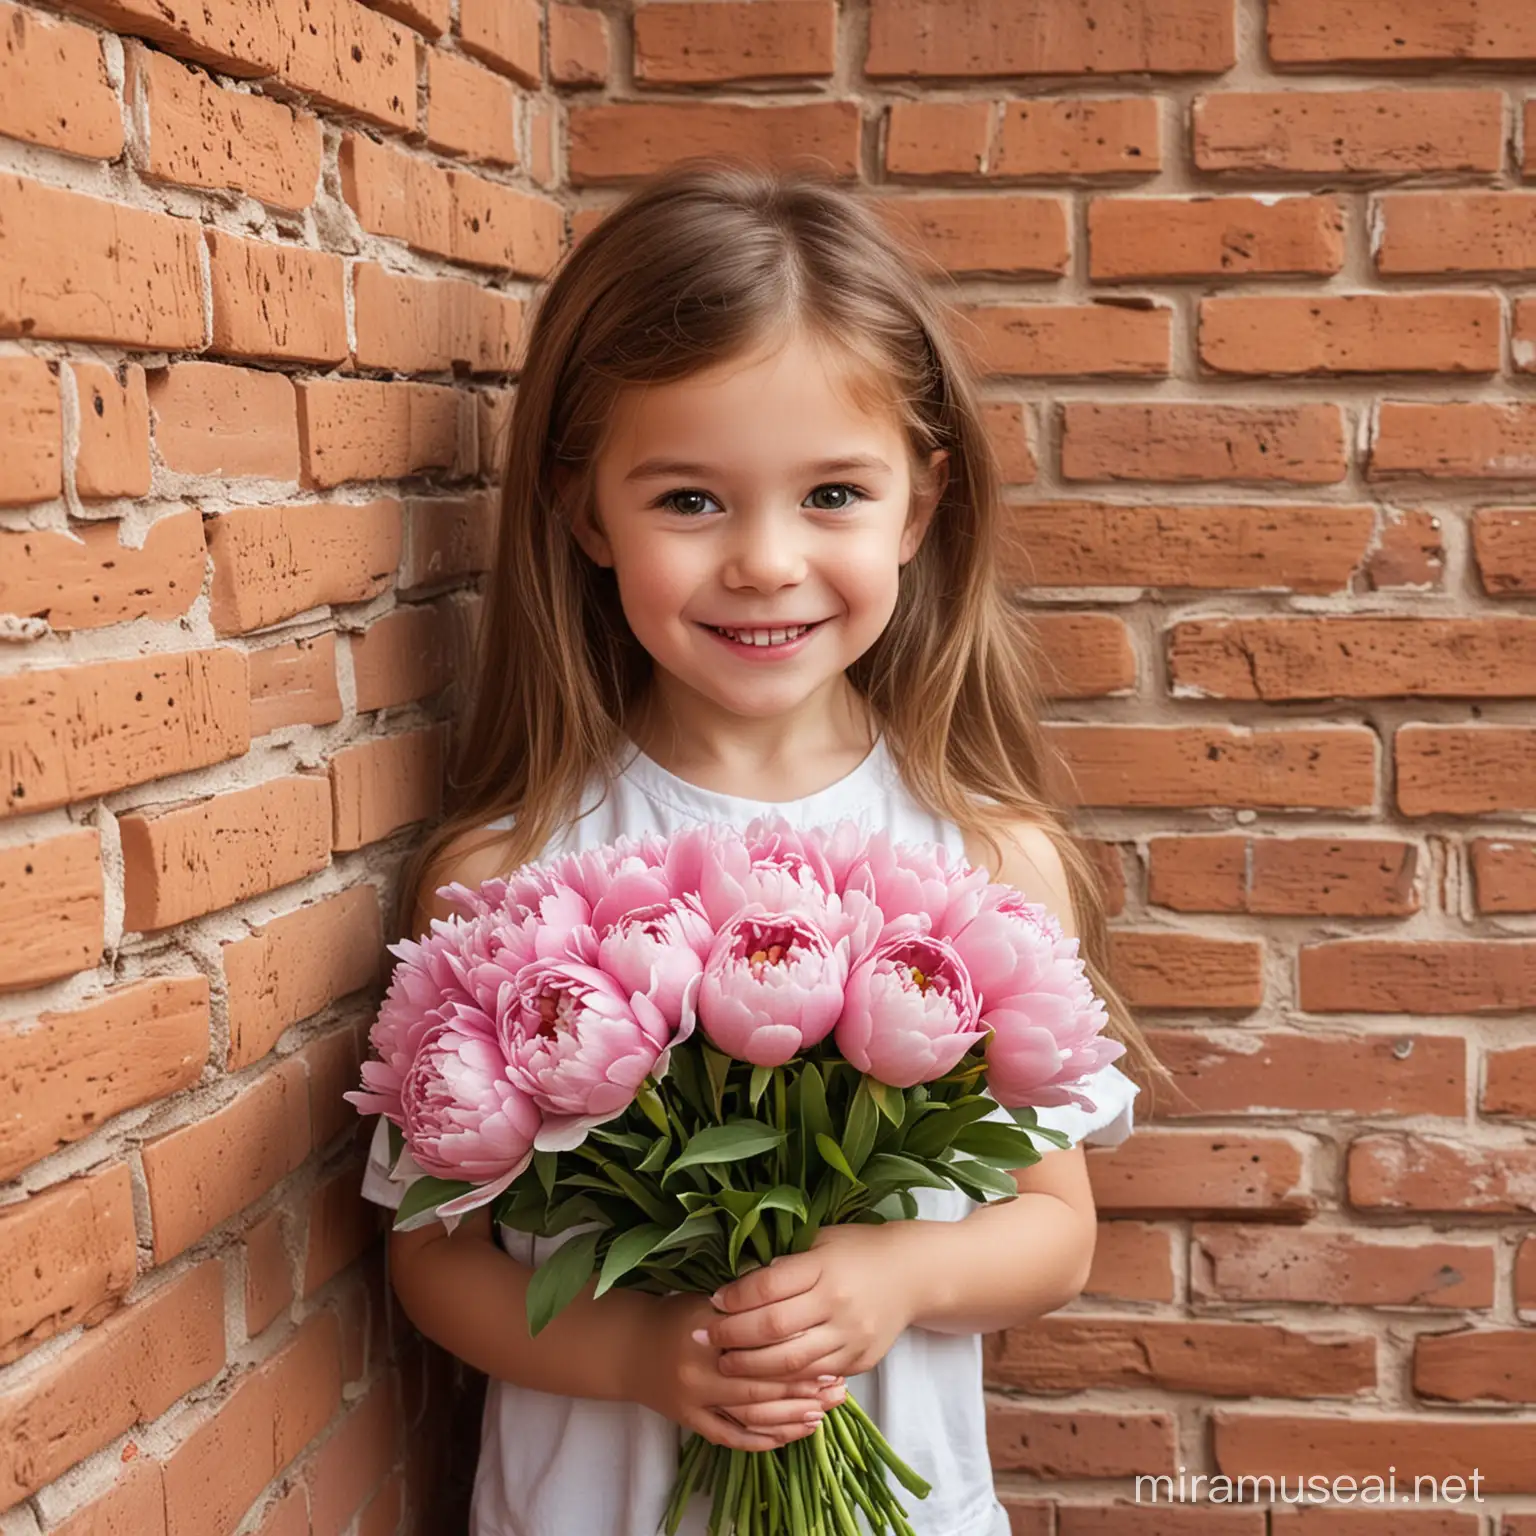 An adorable little girl, amiable, shy and smiling, half-hidden behind a wall comes out to offer a pretty bouquet of spring flowers with peonies: fur details, flowers, red brick wall; She seems to be saying to us: there you go, I love you.